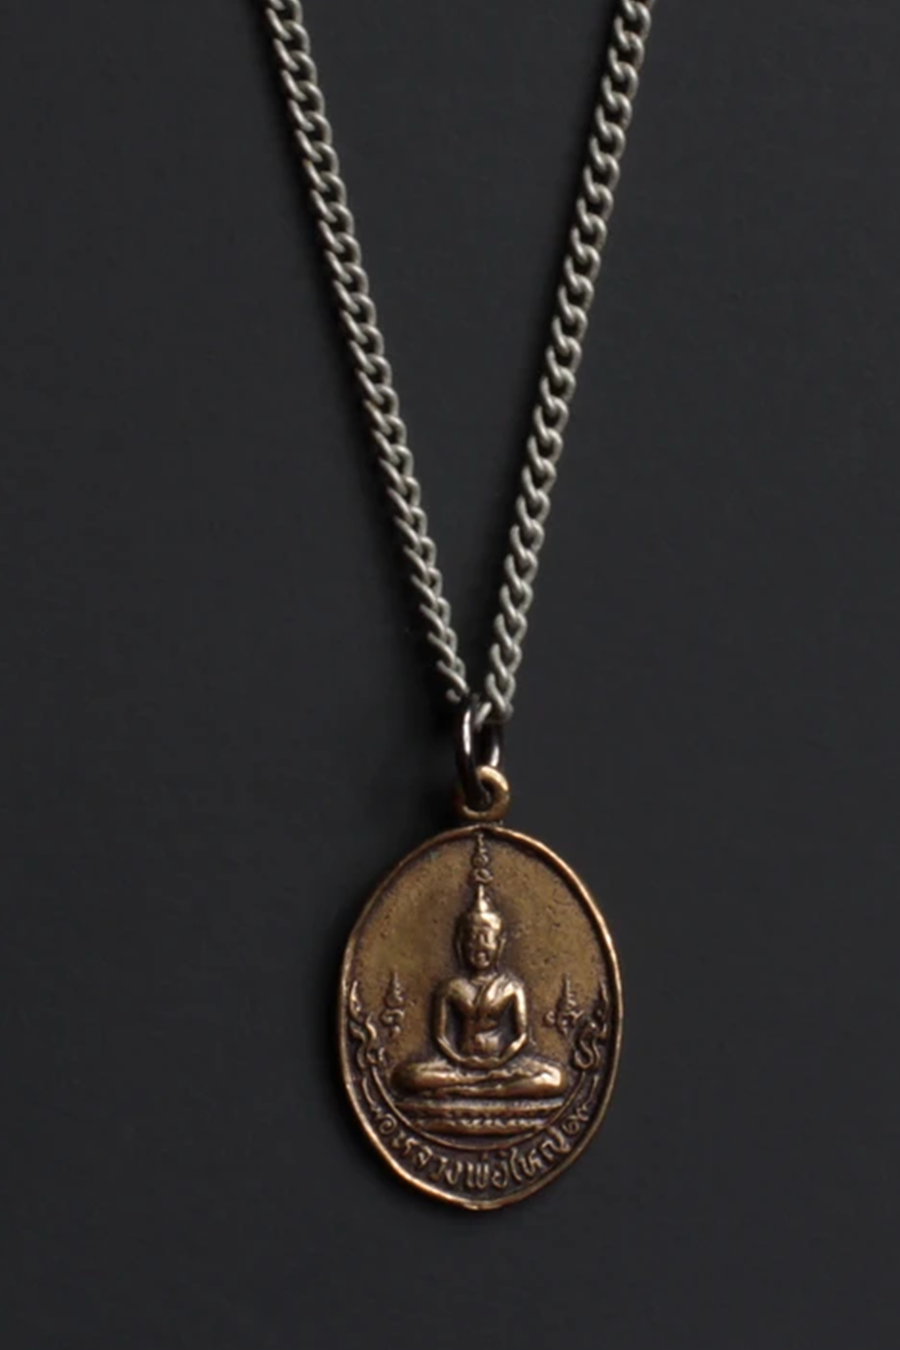 Bronze Oval Buddha Necklace - Main Image Number 1 of 1